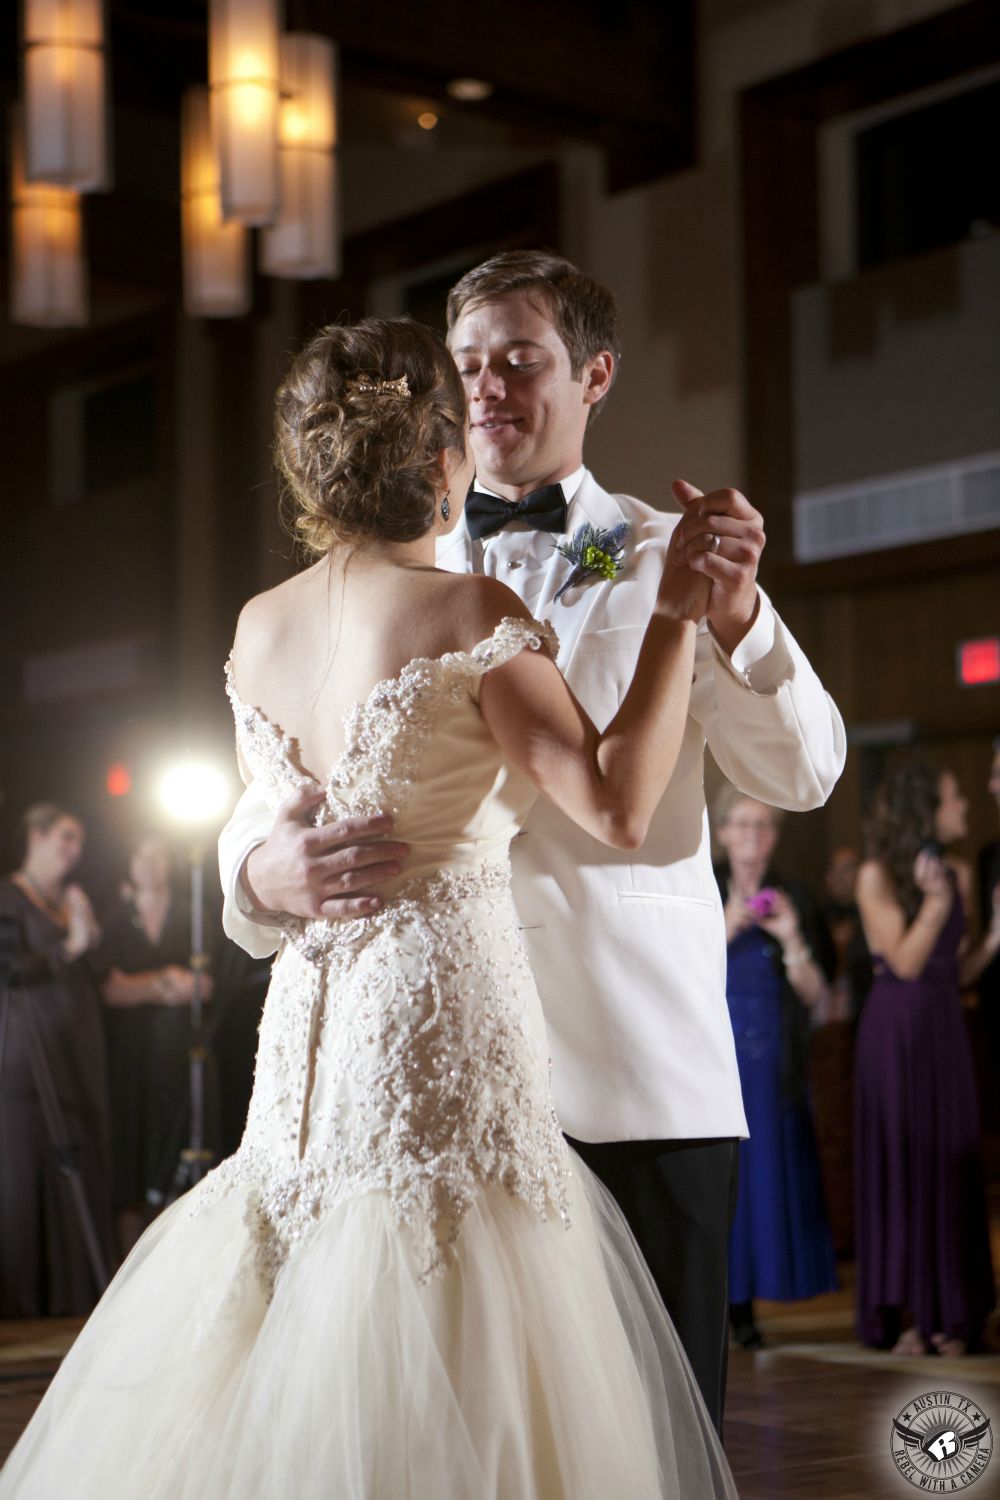 Bride in sparkly off the shoulder bridal gown and groom in white tuxedo jacket and black bowtie with David Kurio floral boutonniere first dance at the AT&T Executive Education and Conference Center ballroom with live jazz band at their wedding reception.